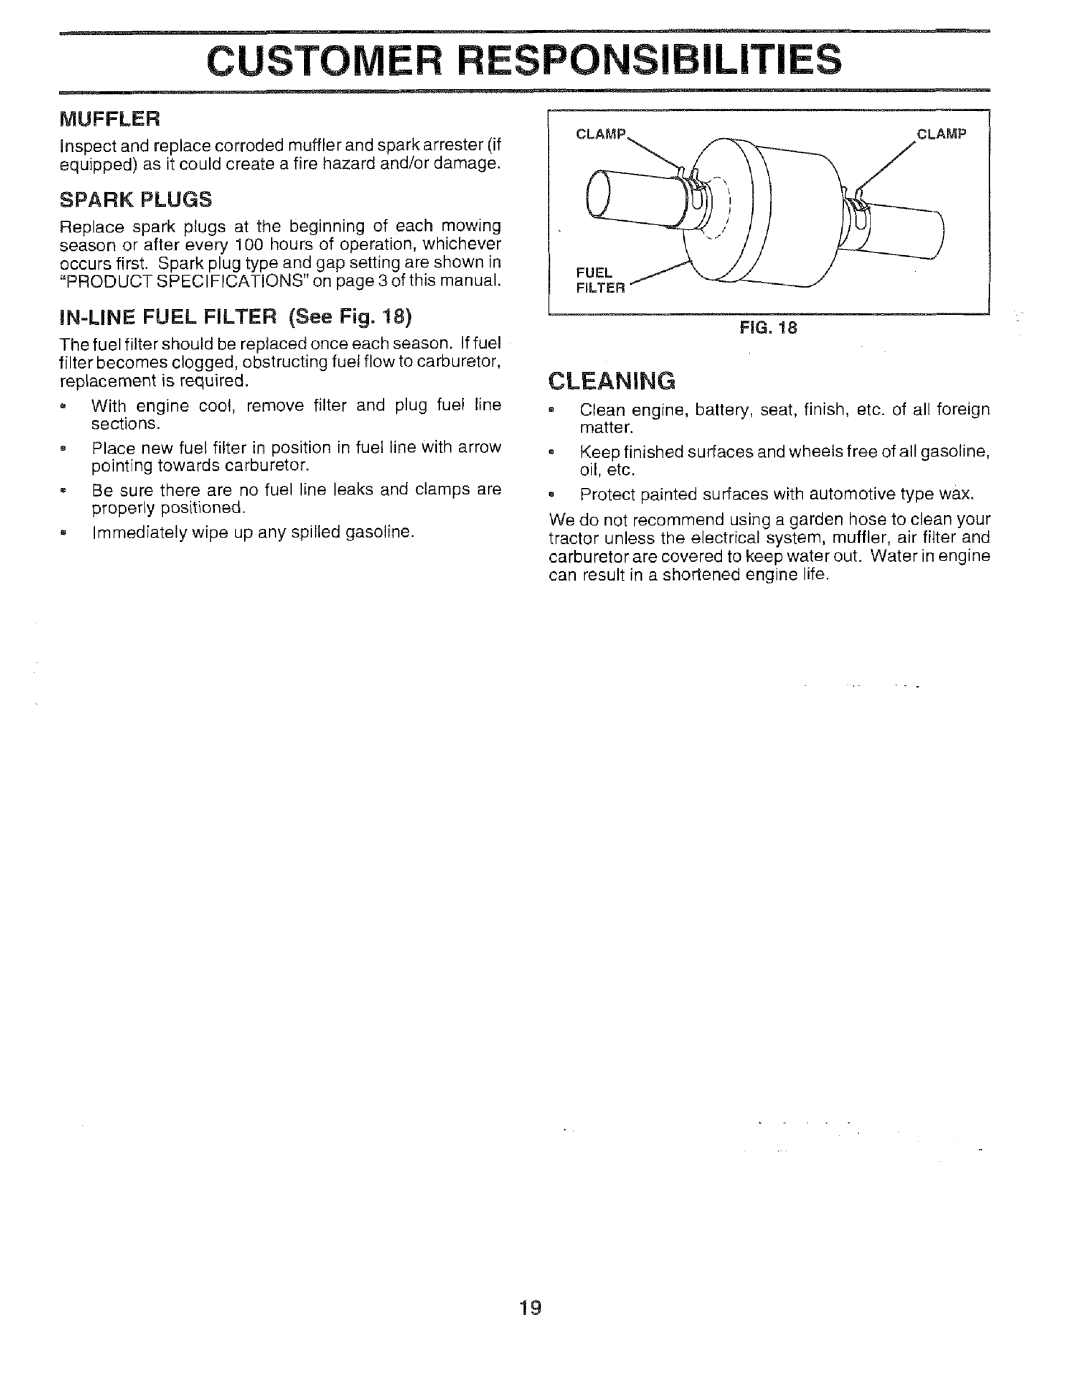 Sears 917.259567 owner manual Cer Respo ;Ibilitie, Cleaning, Spark Plugs, IN-LINEFUEL FILTER See Fig, Muffler 